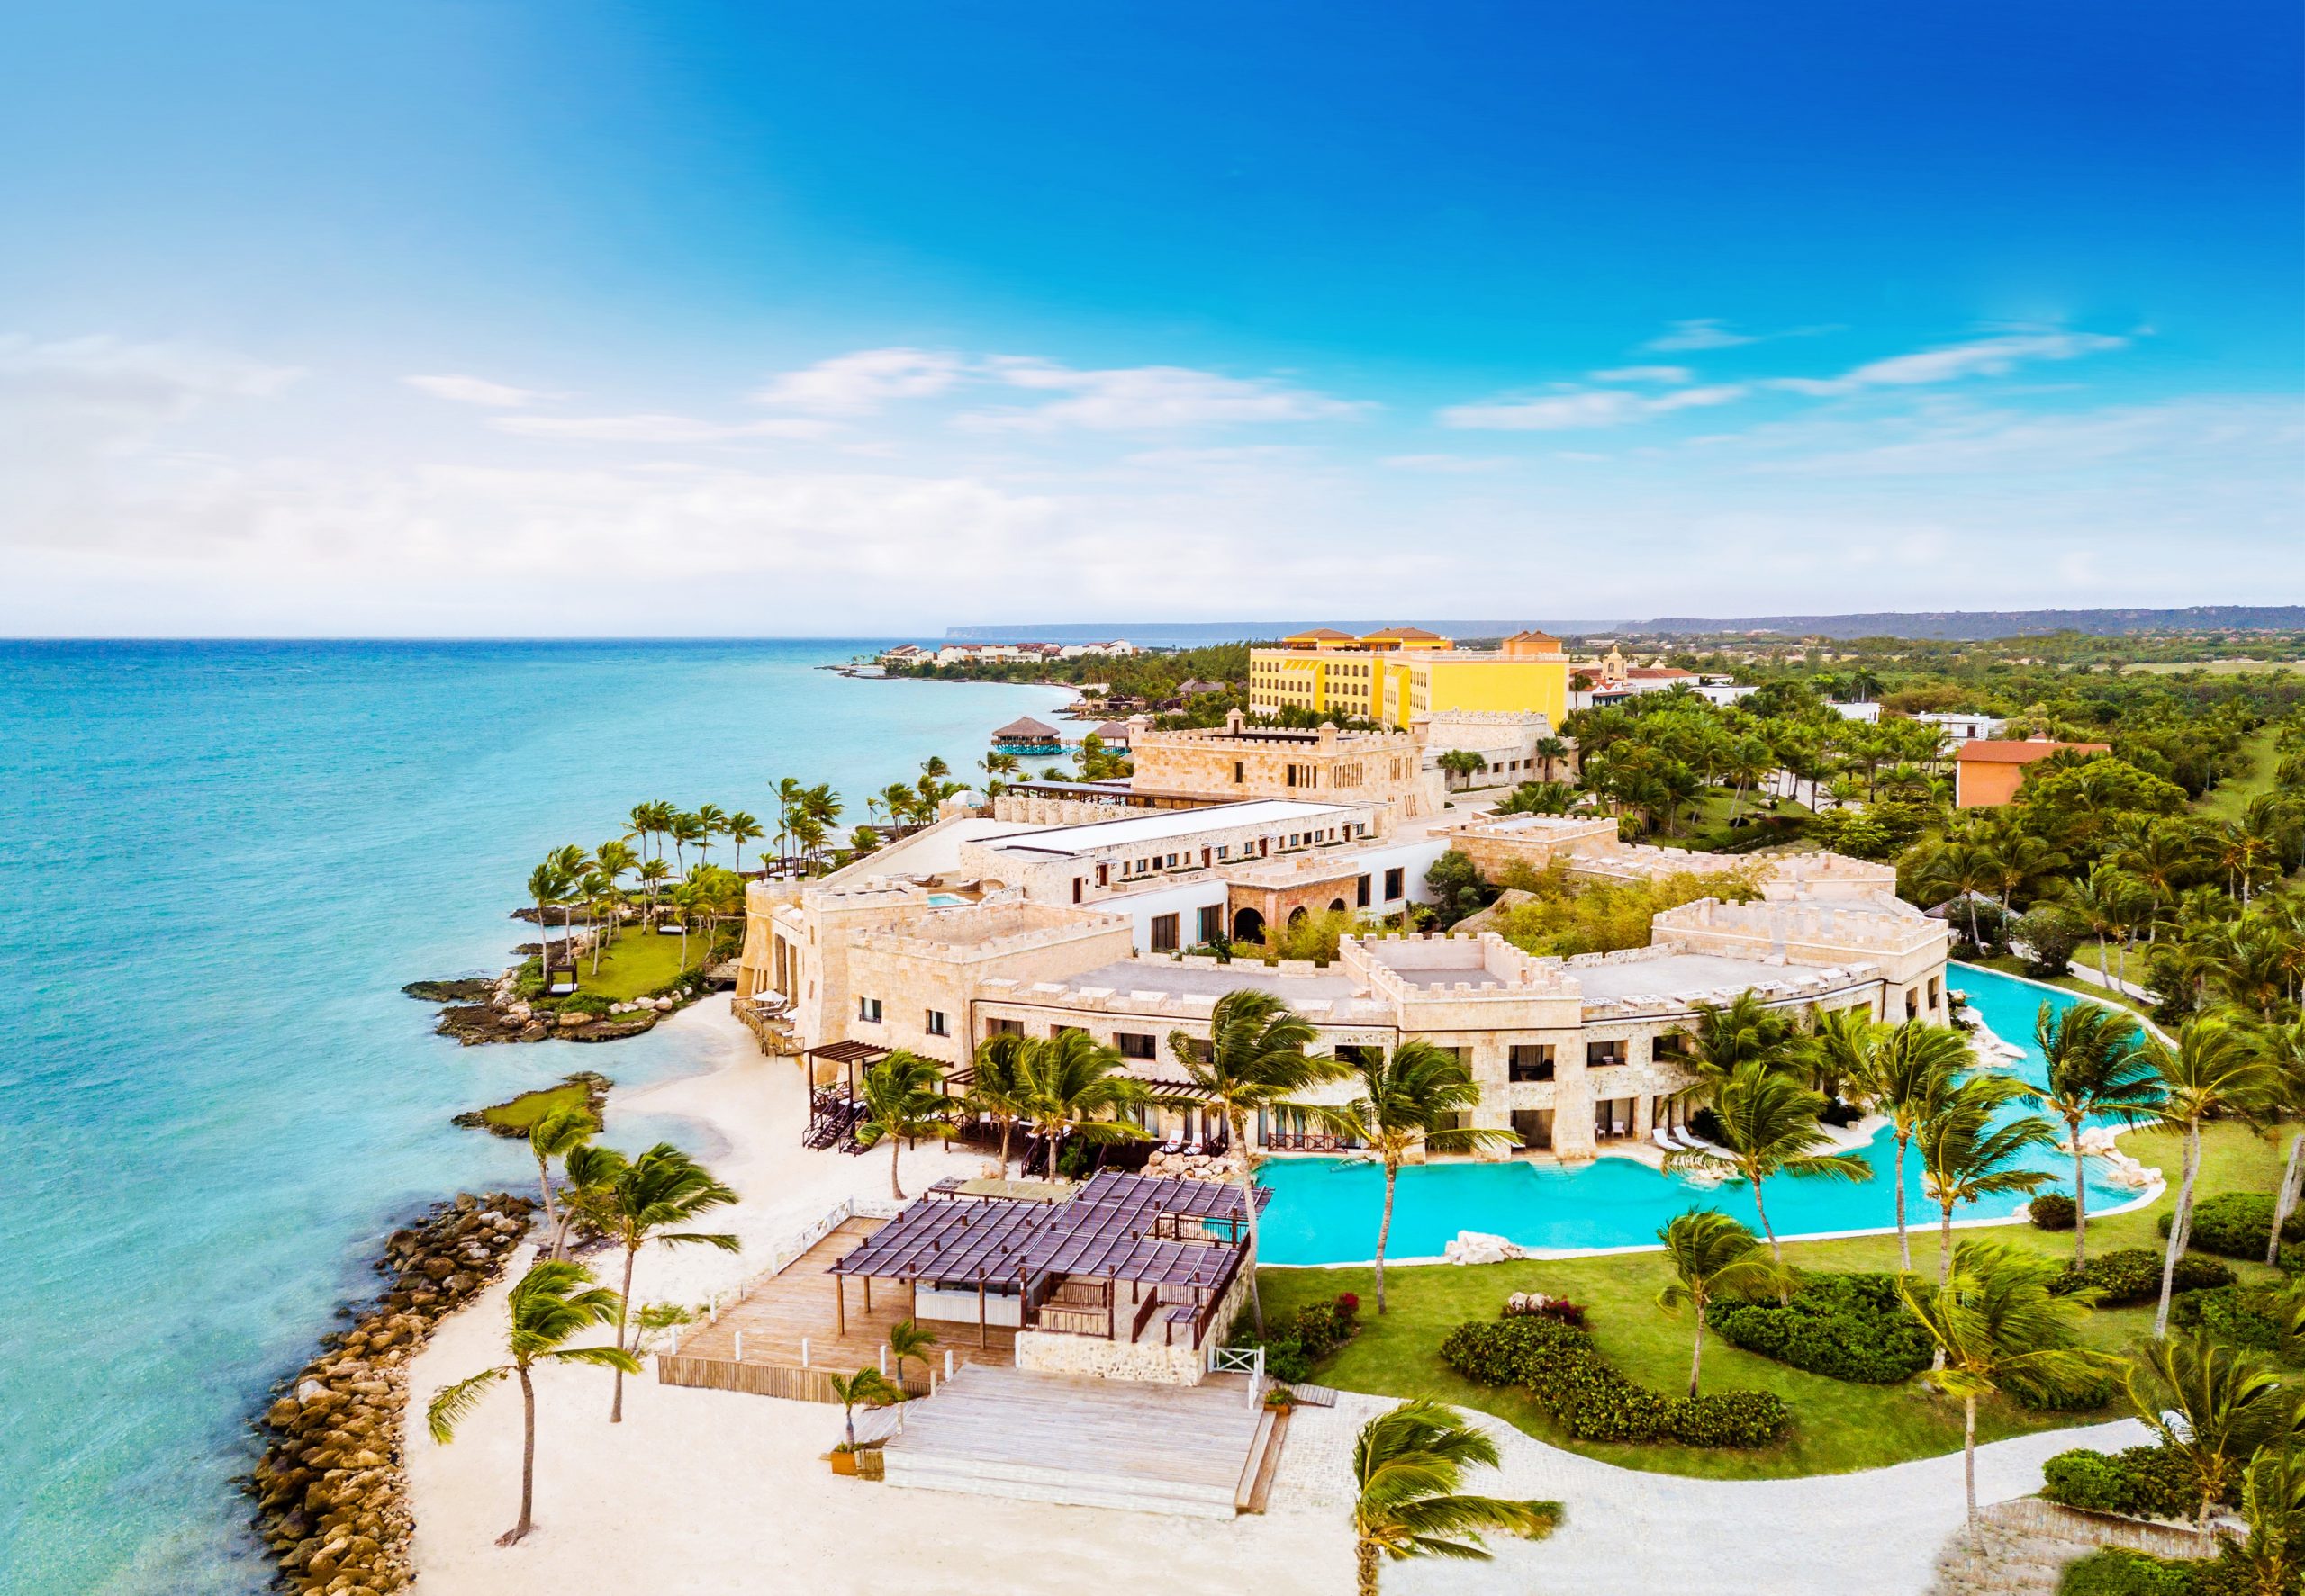 Playa Hotels & Resorts Collaborates With Marriott International To Bring The Luxury Collection Brand To Cap Cana